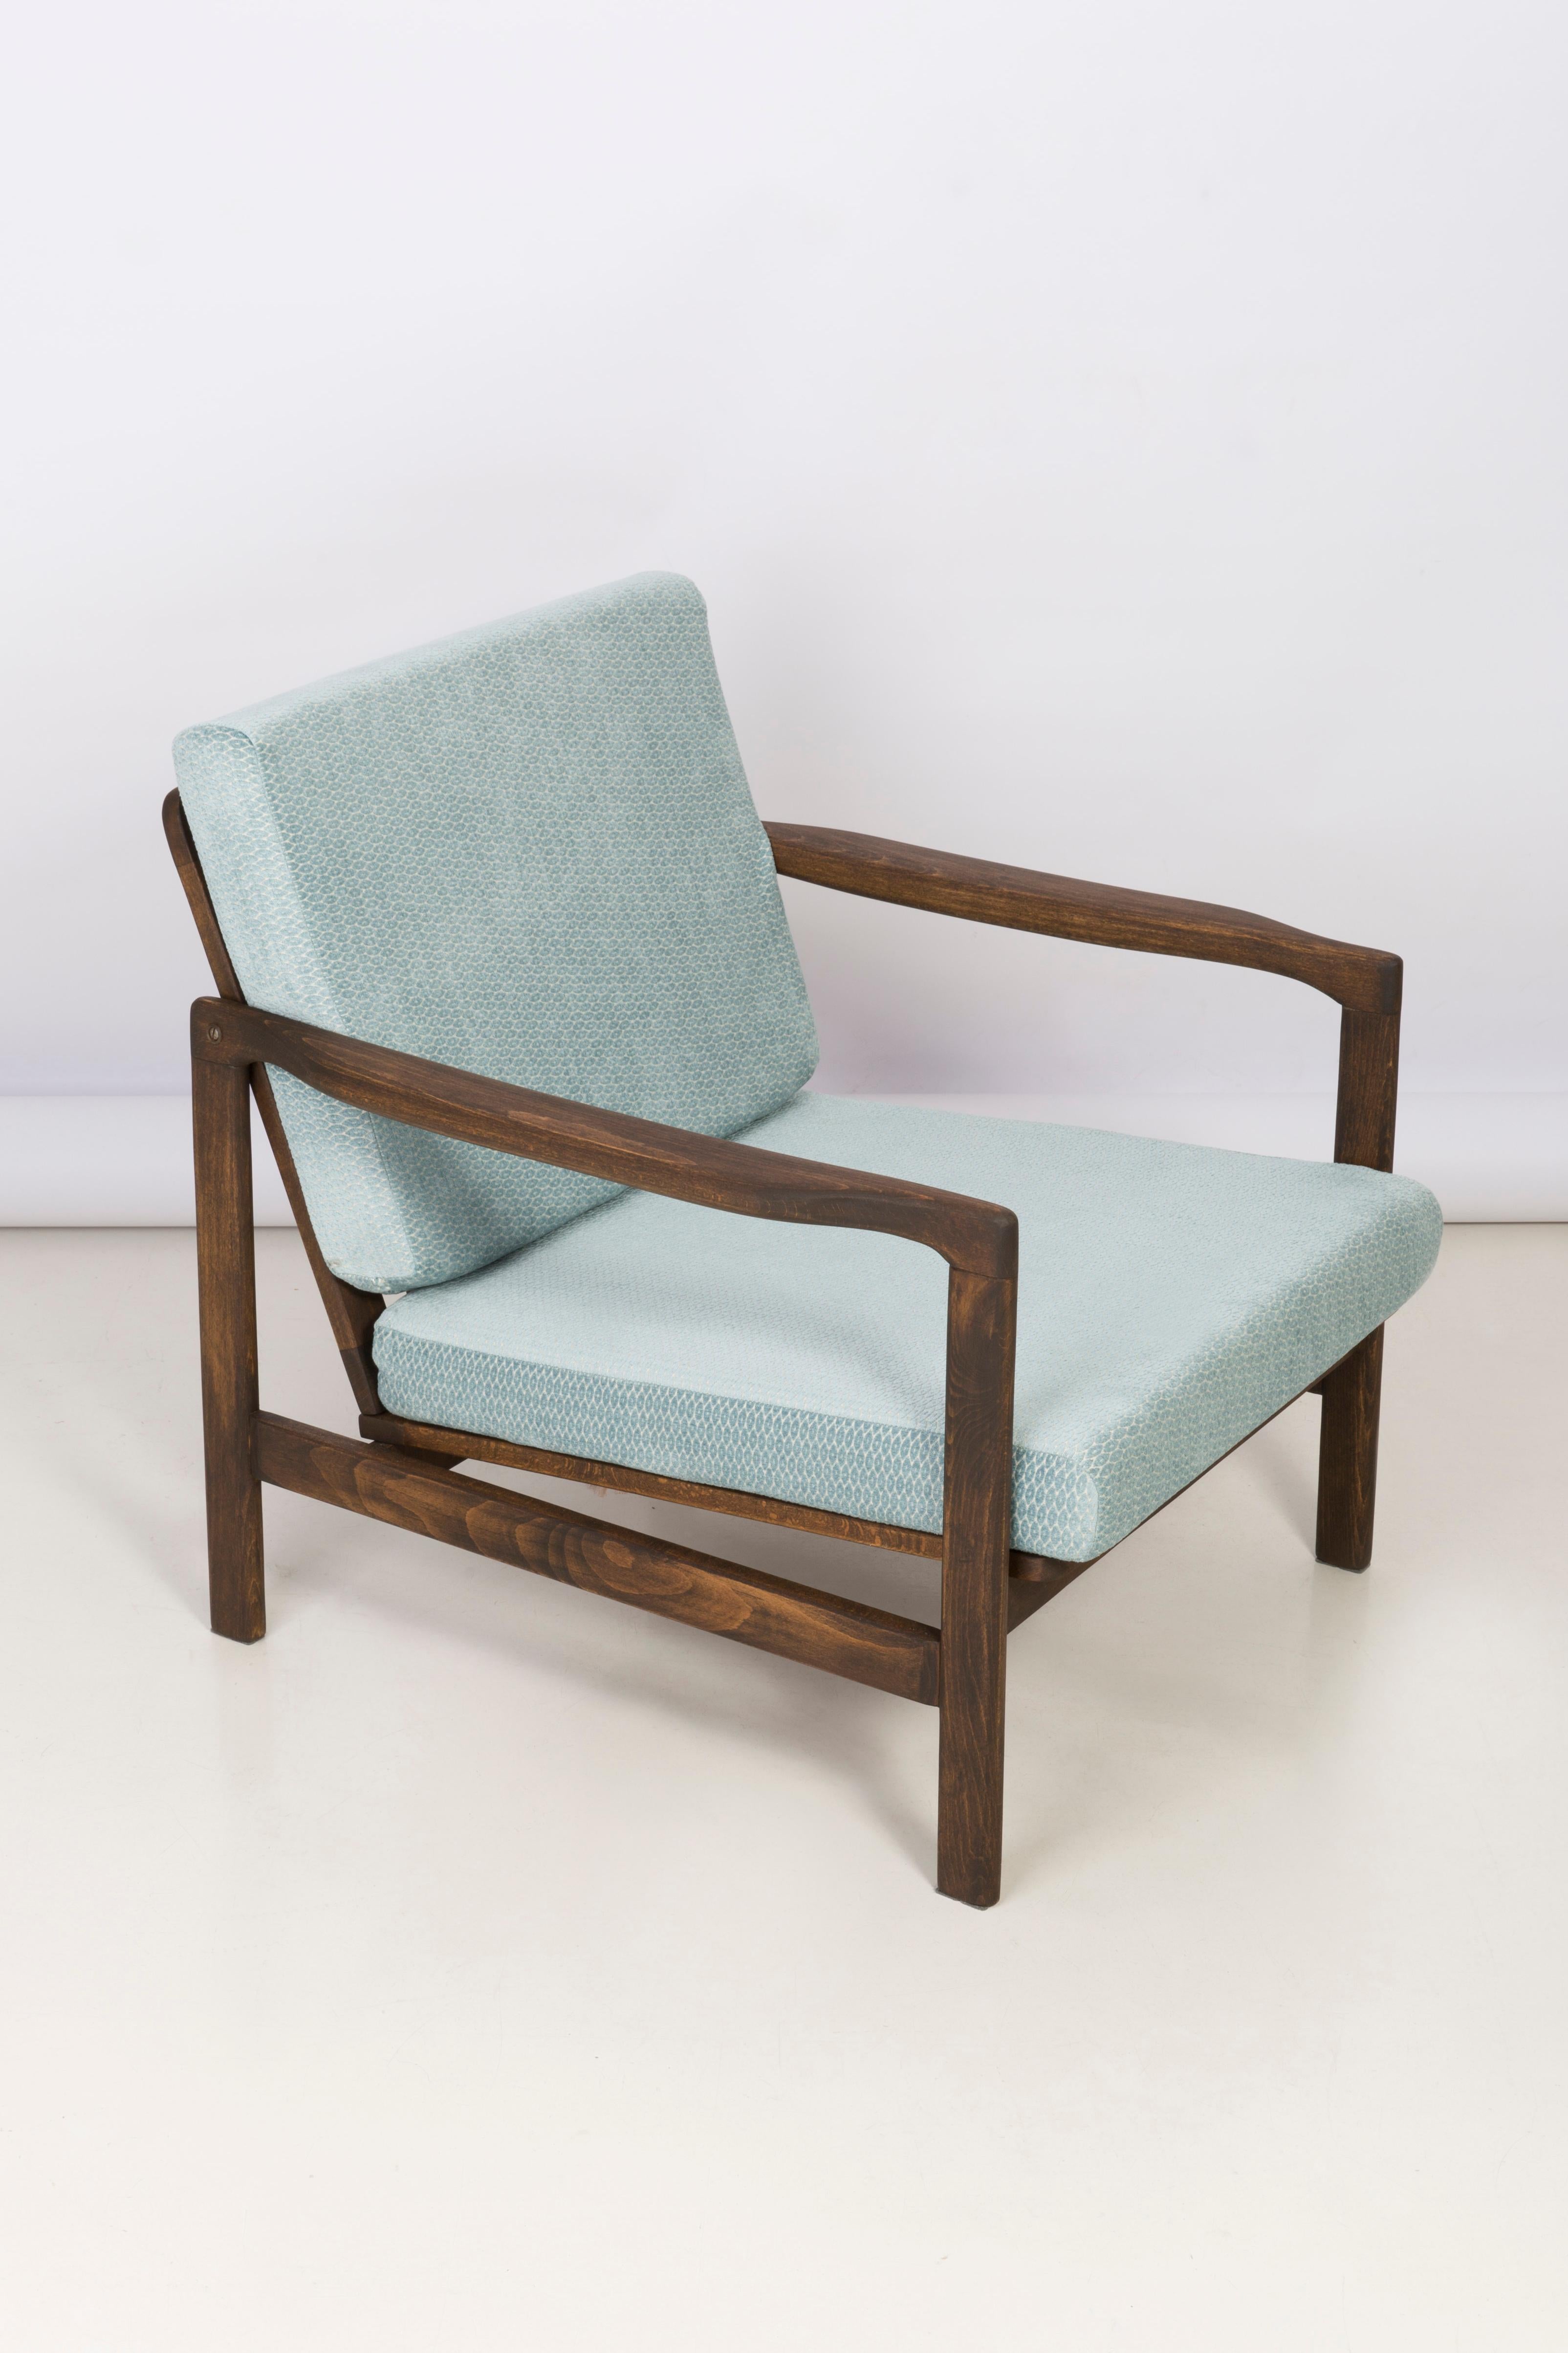 20th Century Set of Two Midcentury Baby Blue Pattern Velvet Armchairs, Zenon Baczyk, 1960s For Sale